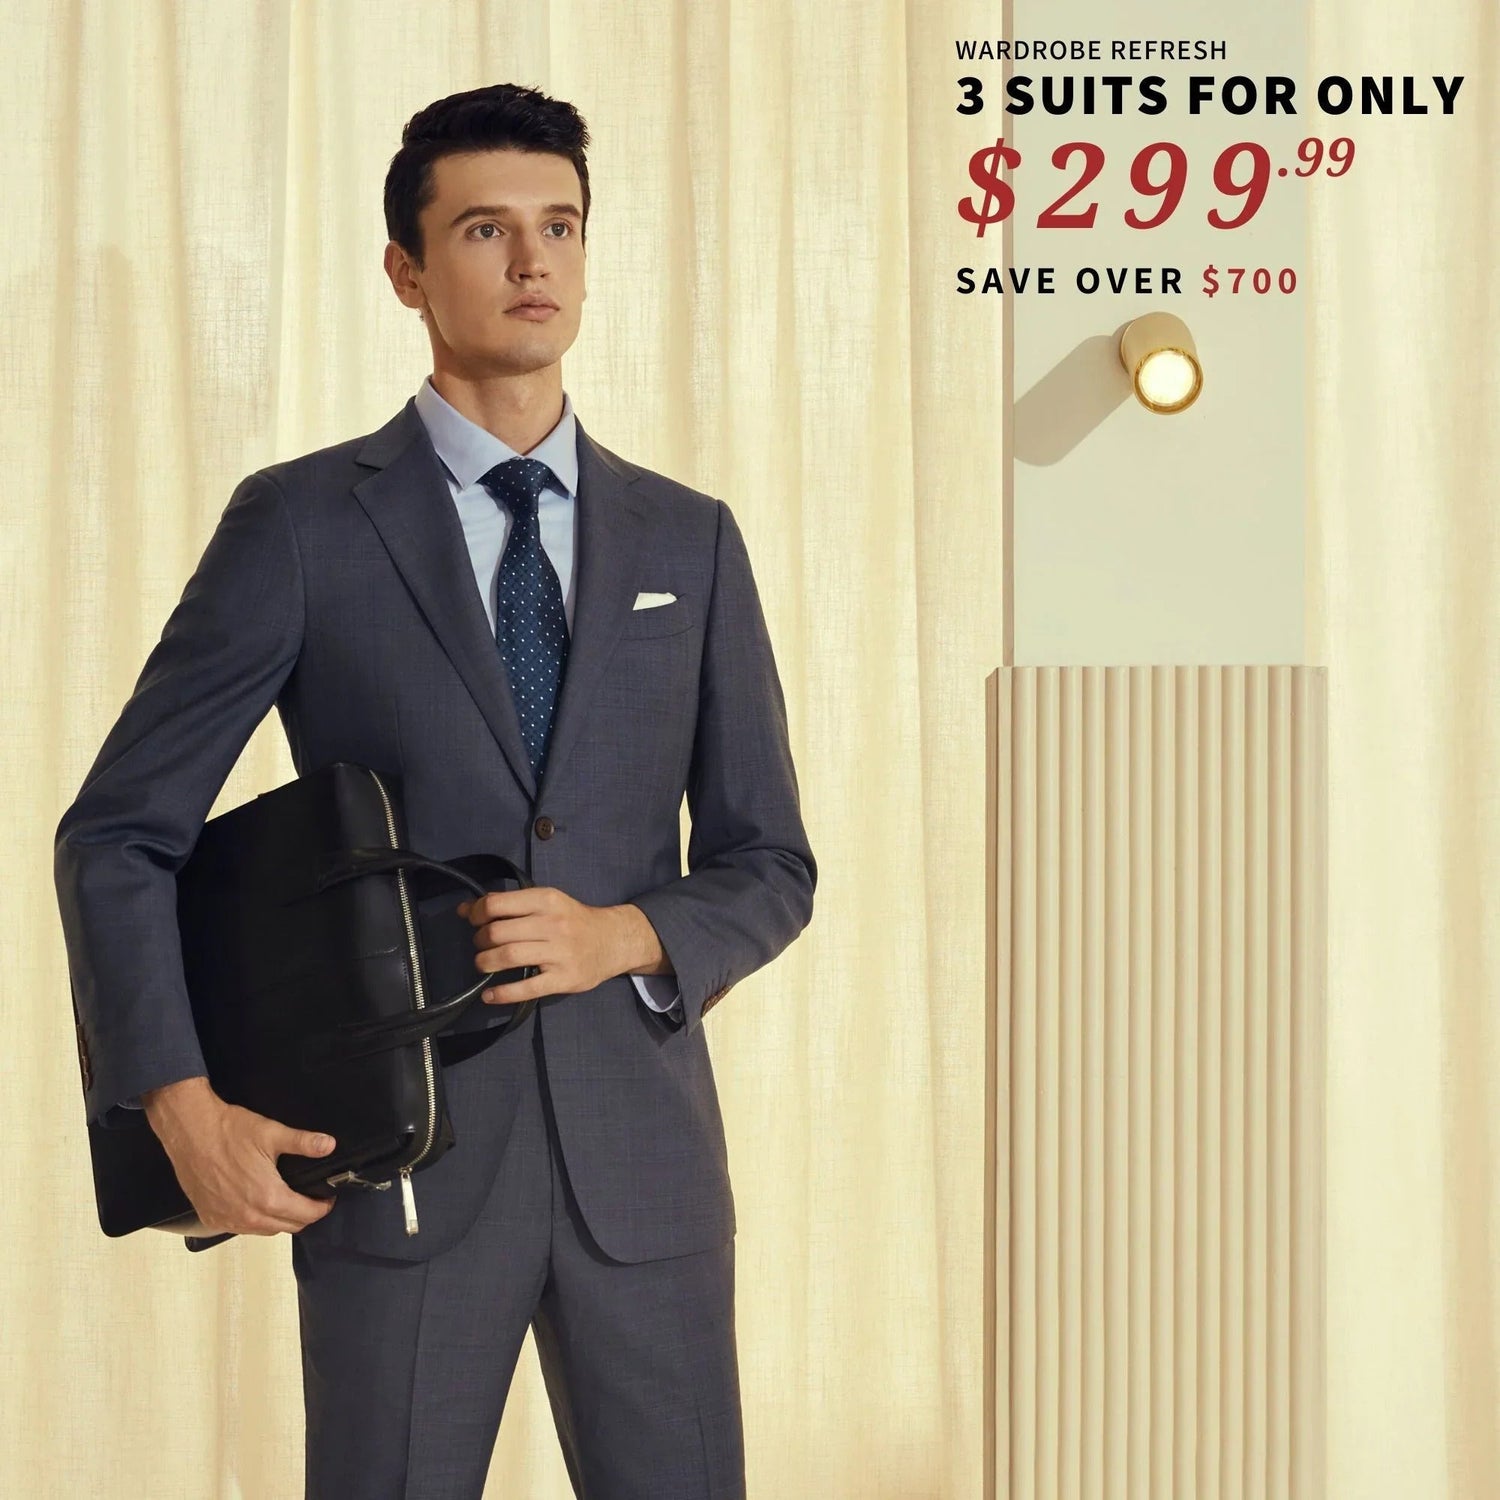 A man in a suit is holding a BYOB briefcase of 3 Suits for $299 online only size.